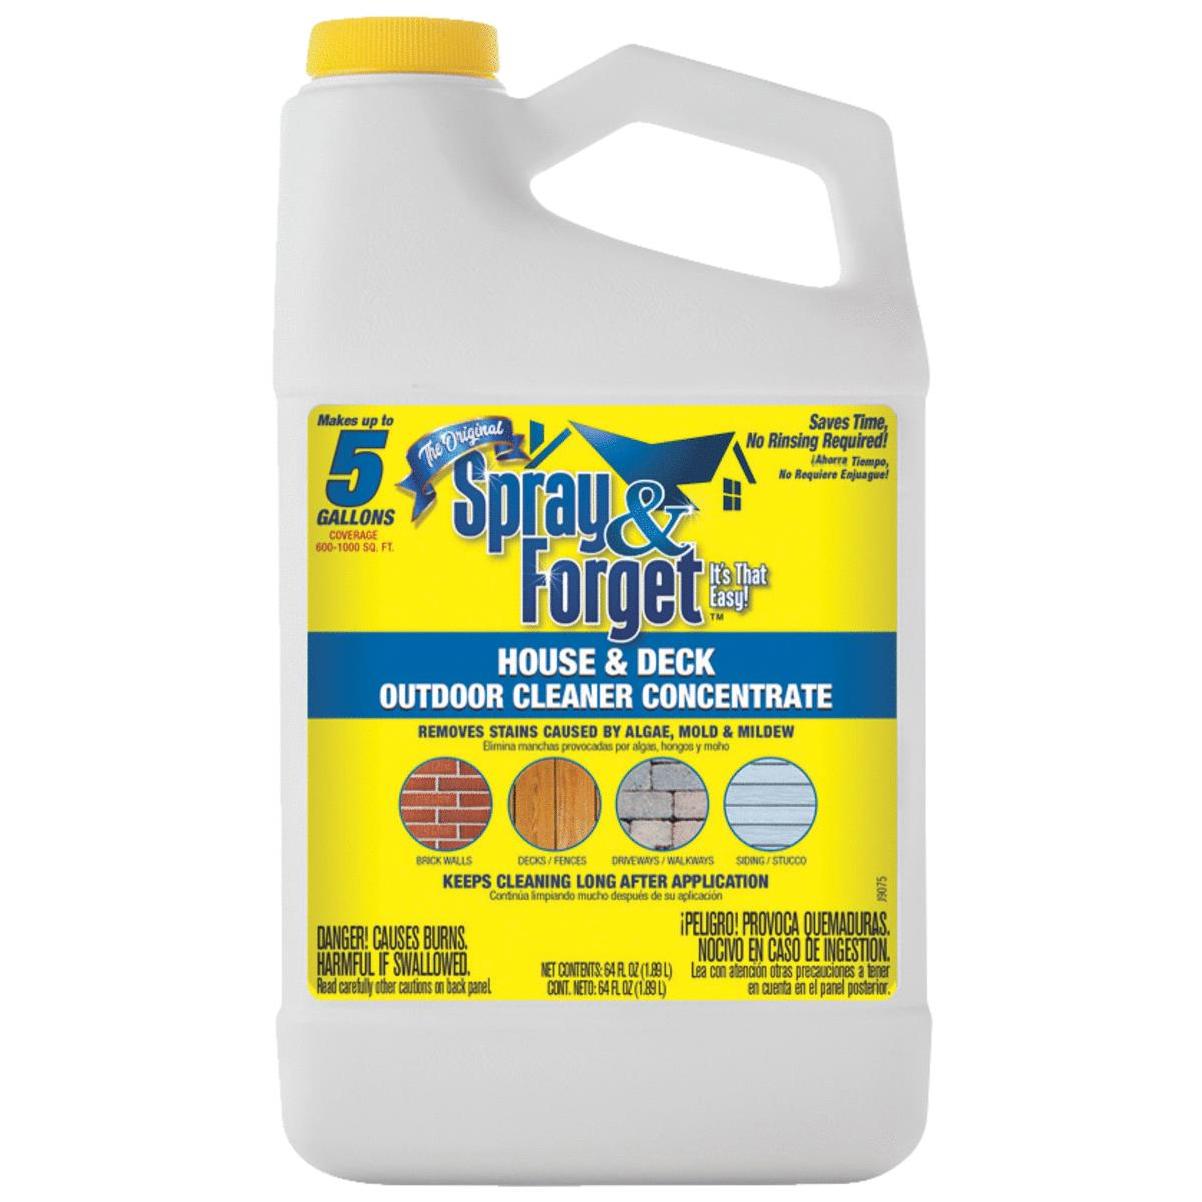 Scotts 3.78 L Outdoor Cleaner Plus OxiClean Concentrate